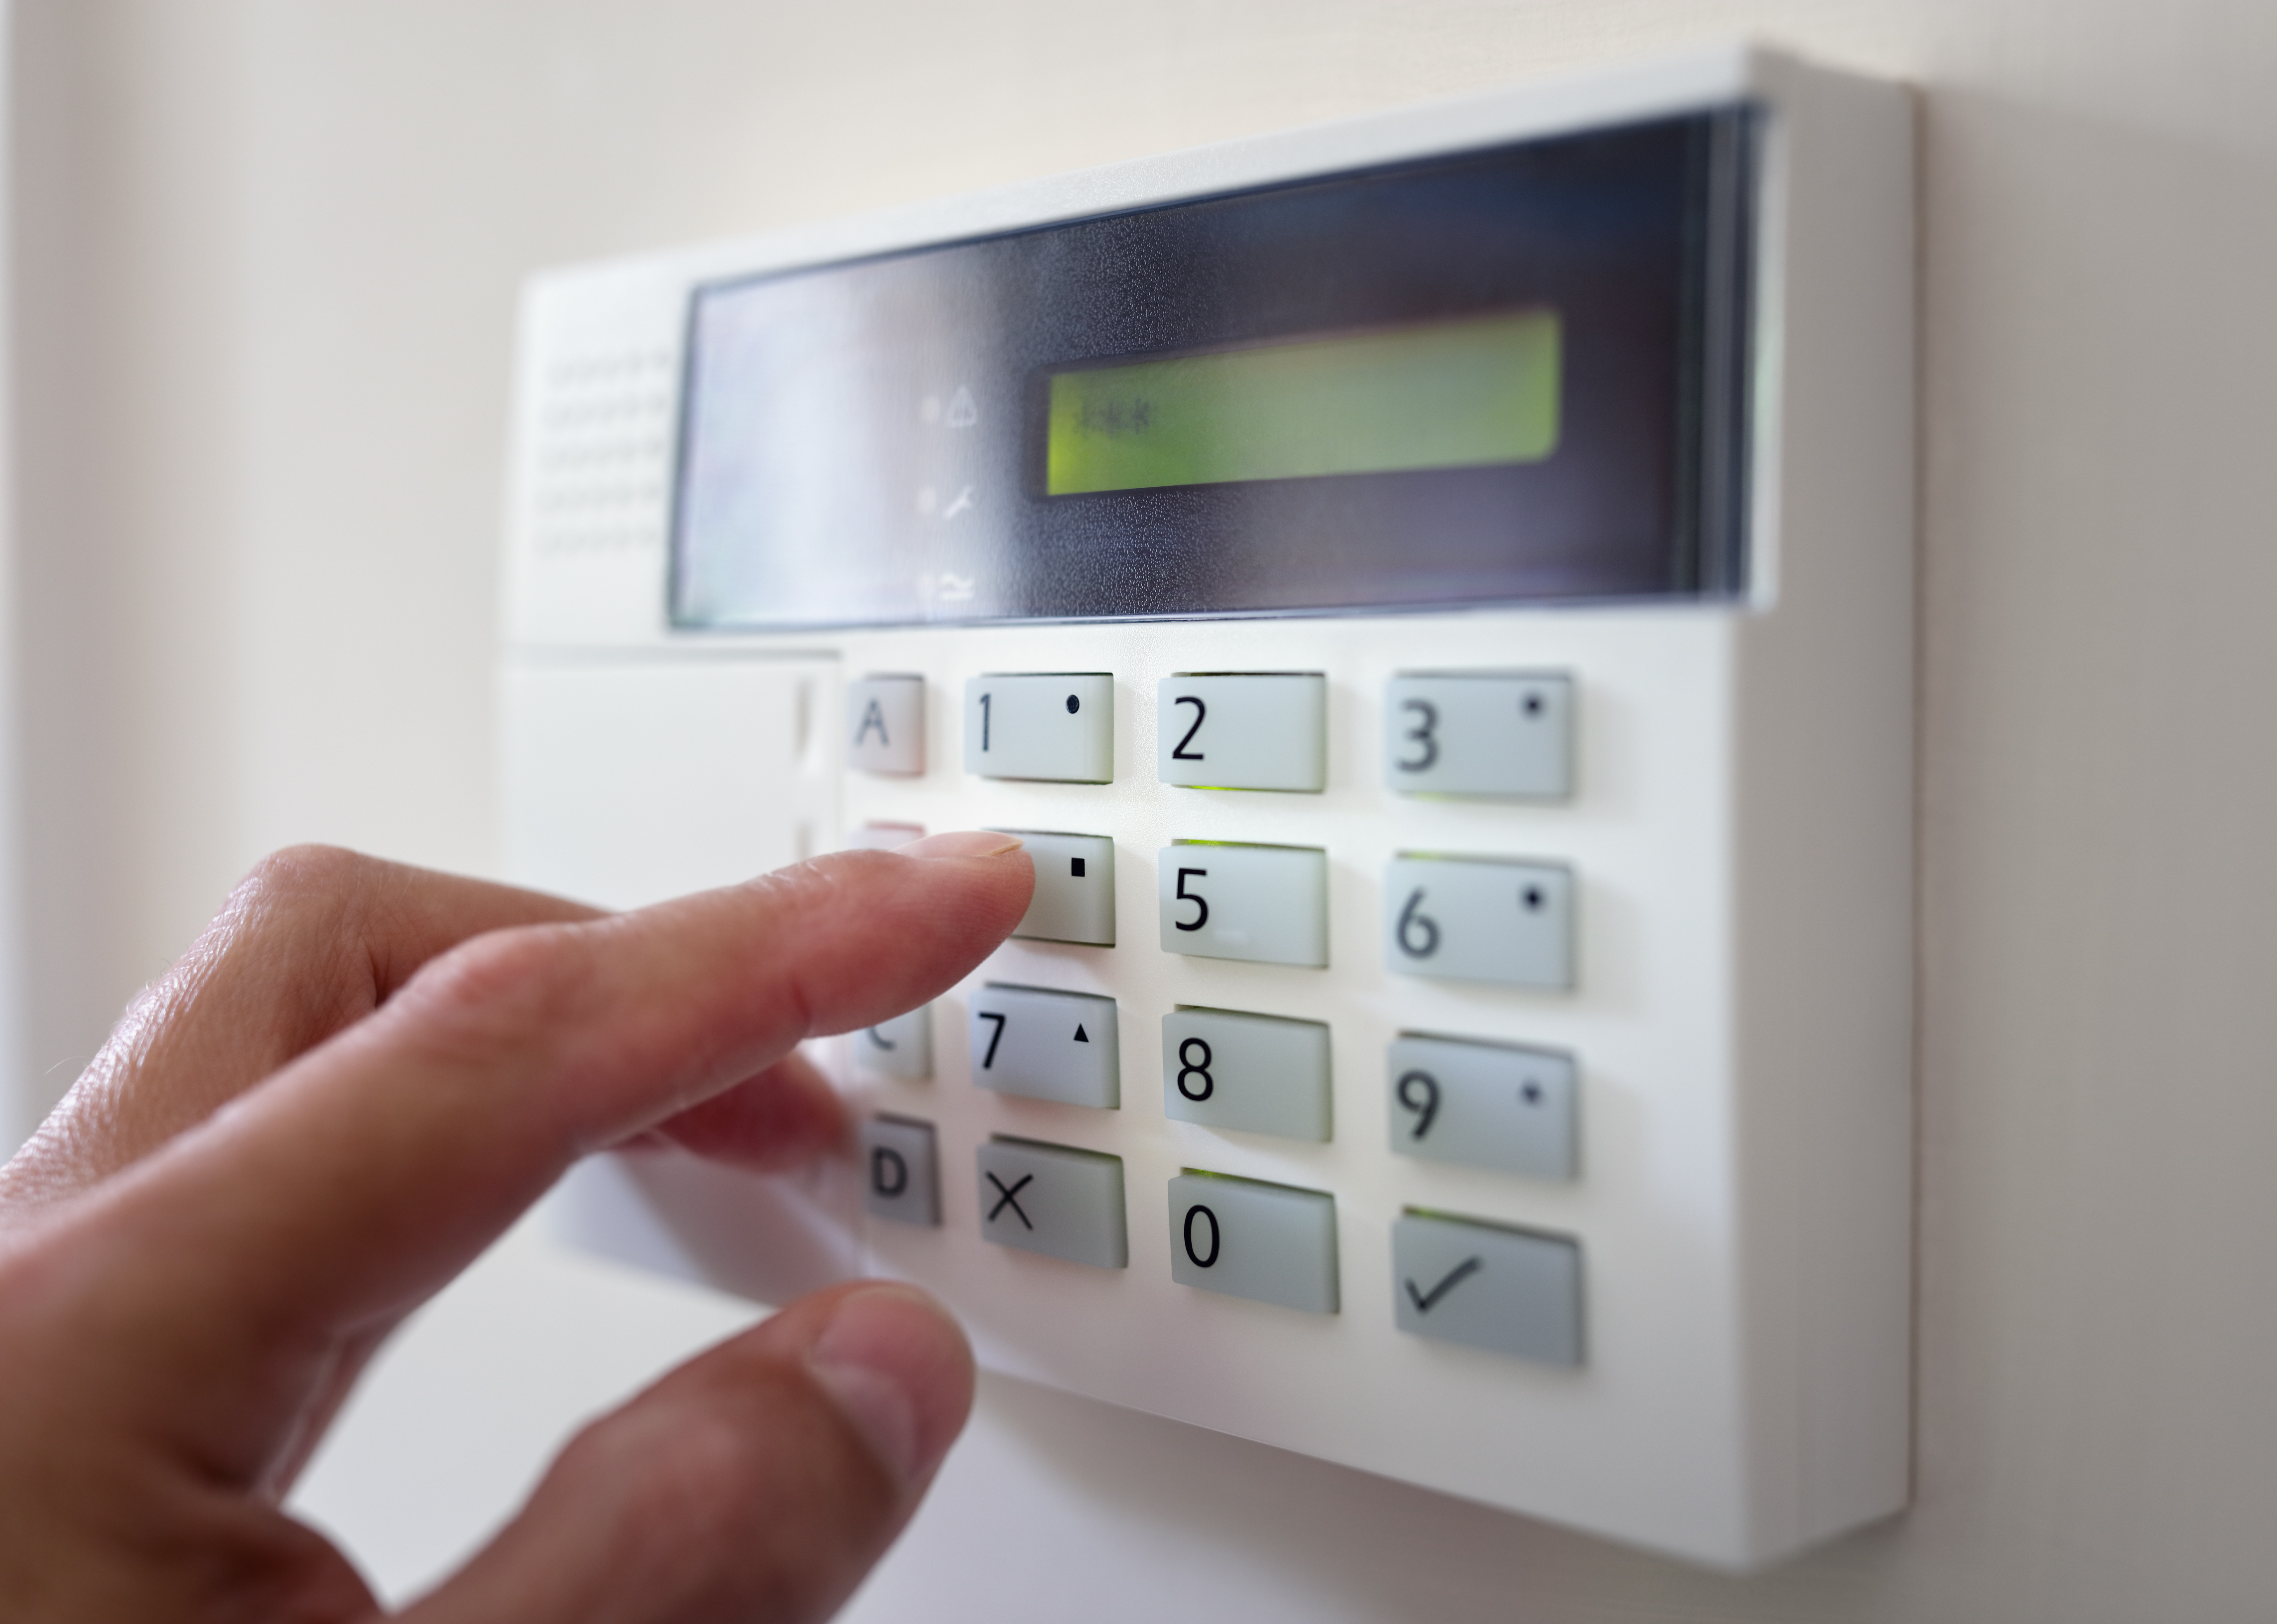 Frontpoint Home Security Systems in Idaho Falls | Security Systems Idaho